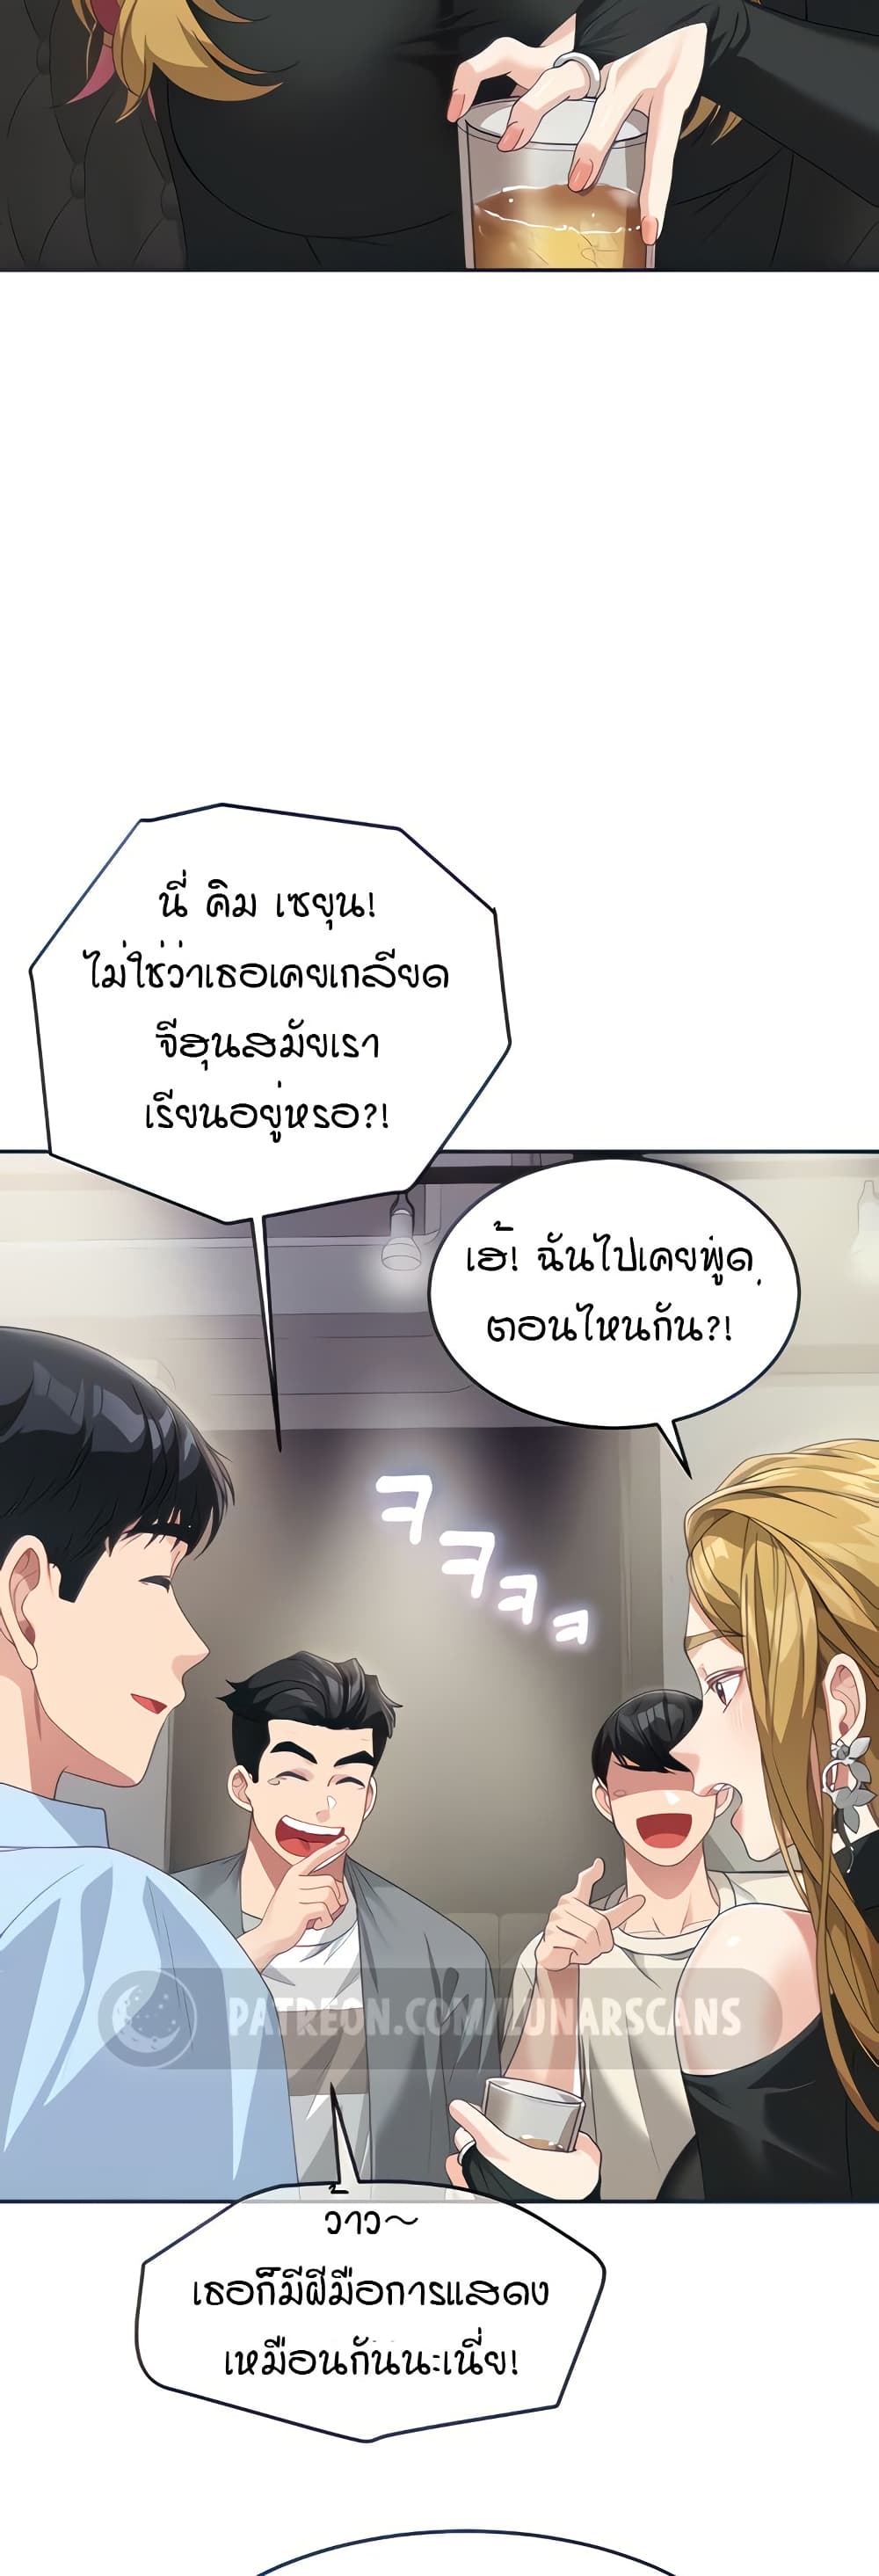 Is It Your Mother or Sister? ตอนที่ 7 ภาพ 12